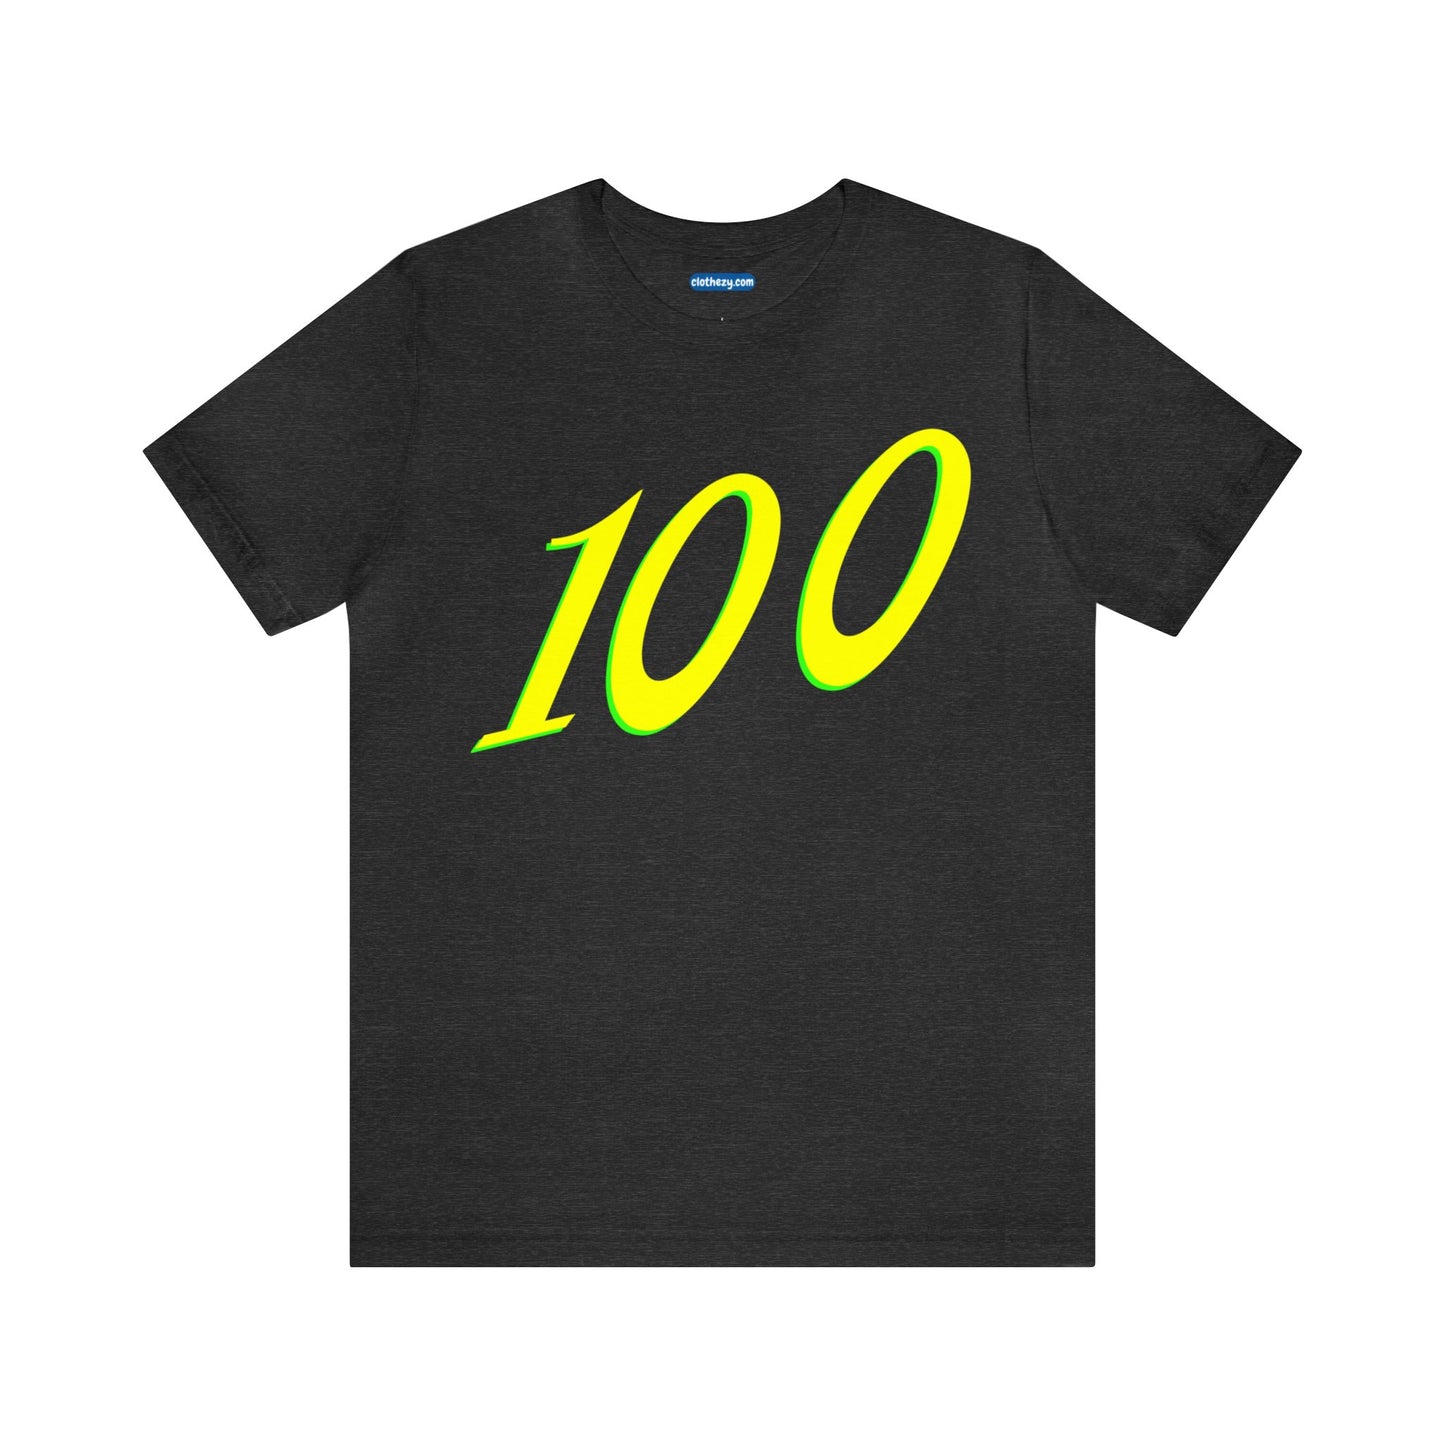 Number 100 Design - Soft Cotton Tee for birthdays and celebrations, Gift for friends and family, Multiple Options by clothezy.com in Dark Grey Heather Size Small - Buy Now